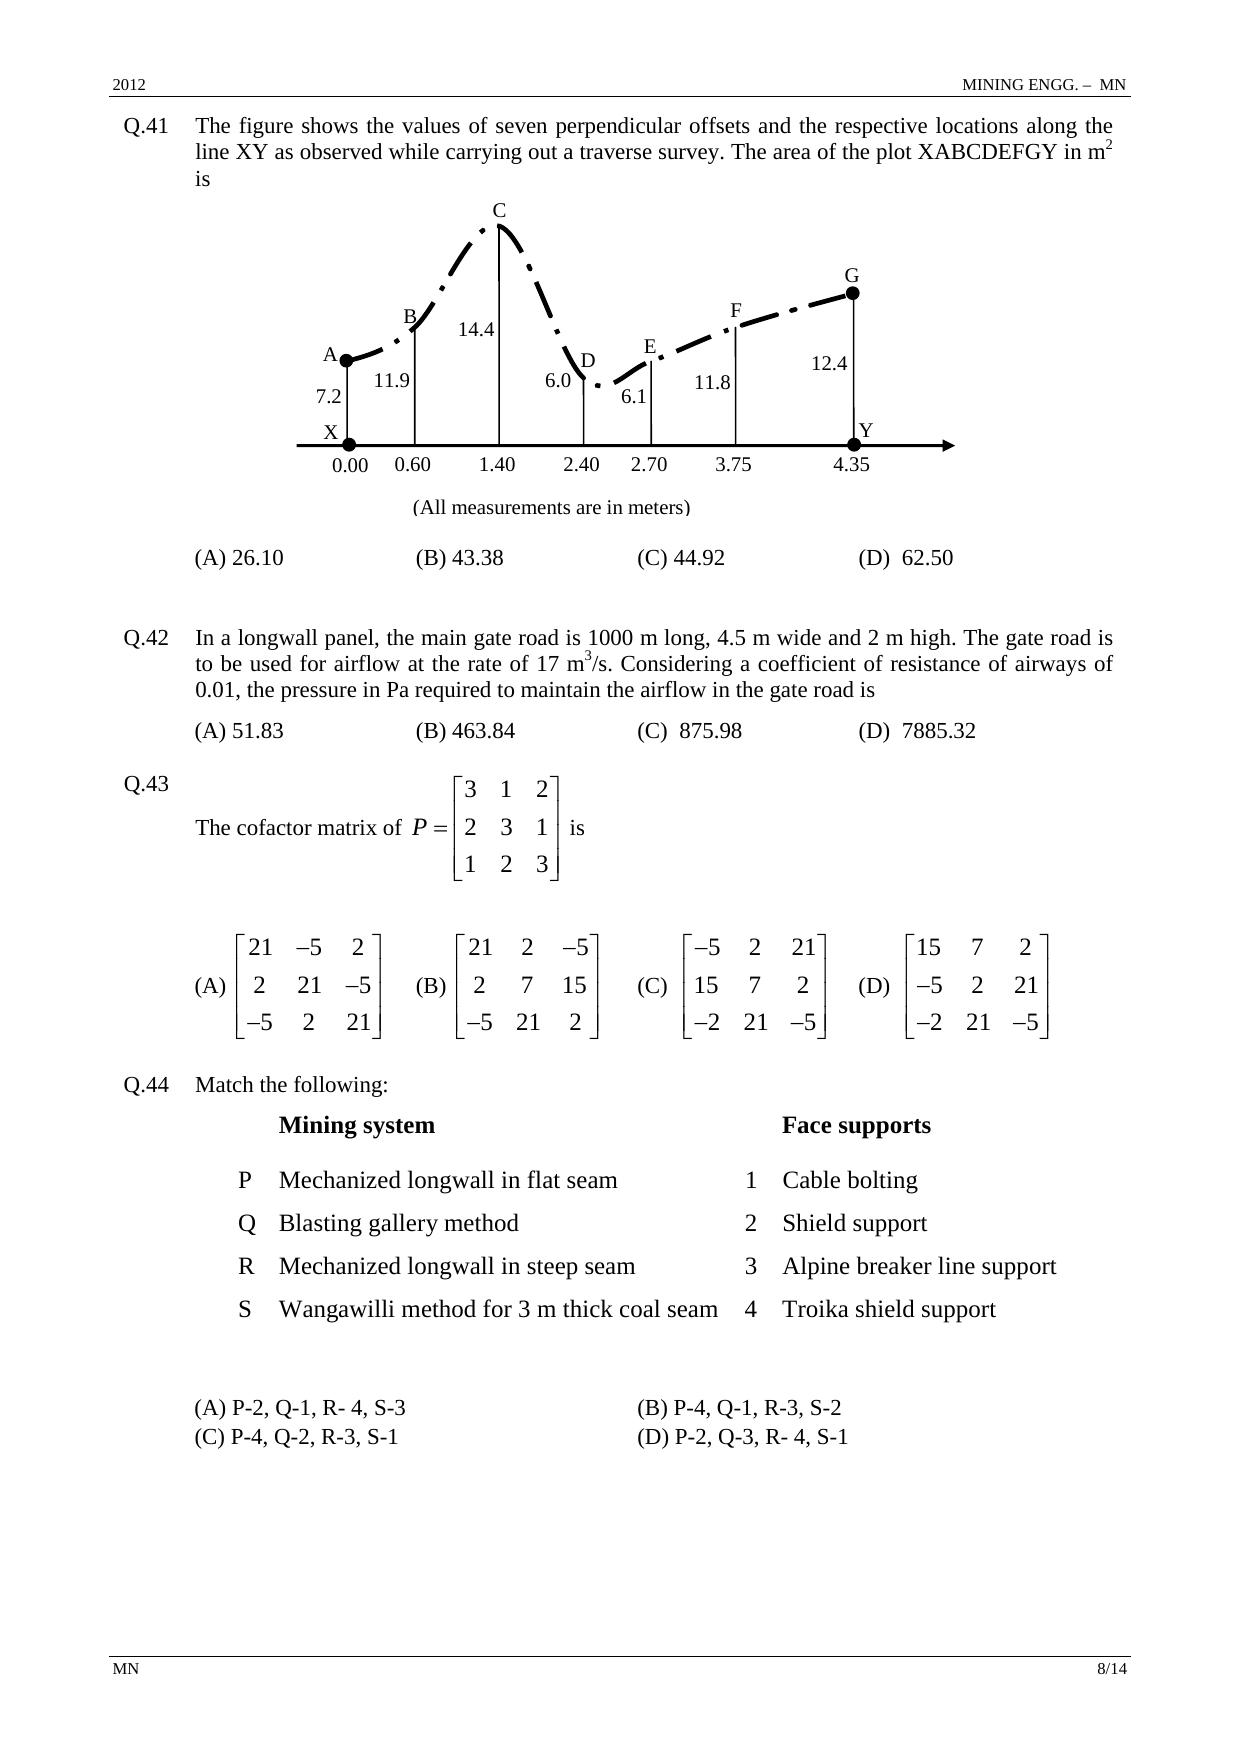 GATE 2012 Mining Engineering (MN) Question Paper with Answer Key - Page 8